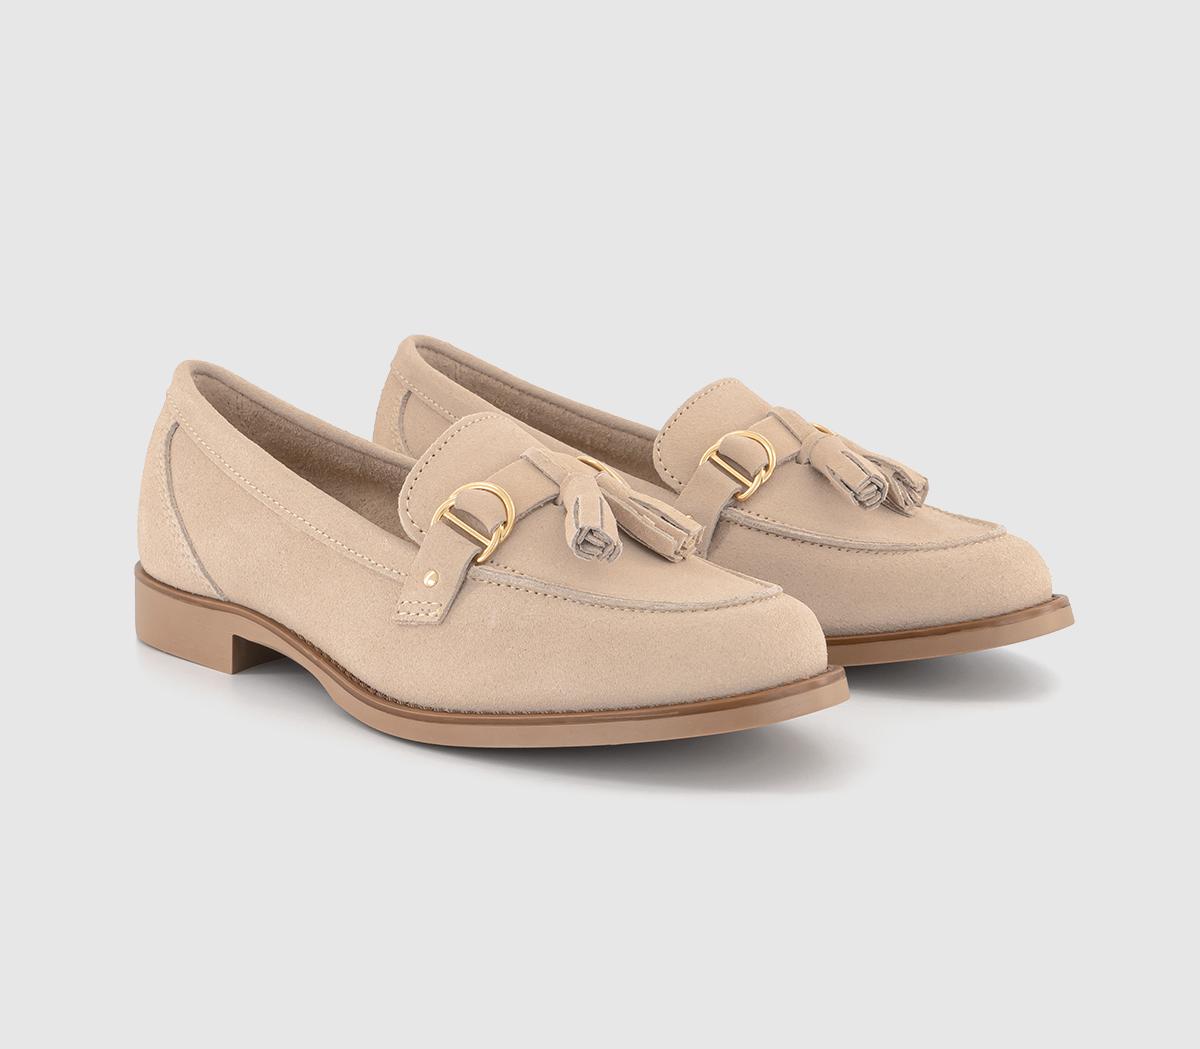 OFFICE Womens Feels Leather Trim Tassel Loafers Blush Suede Natural, 4